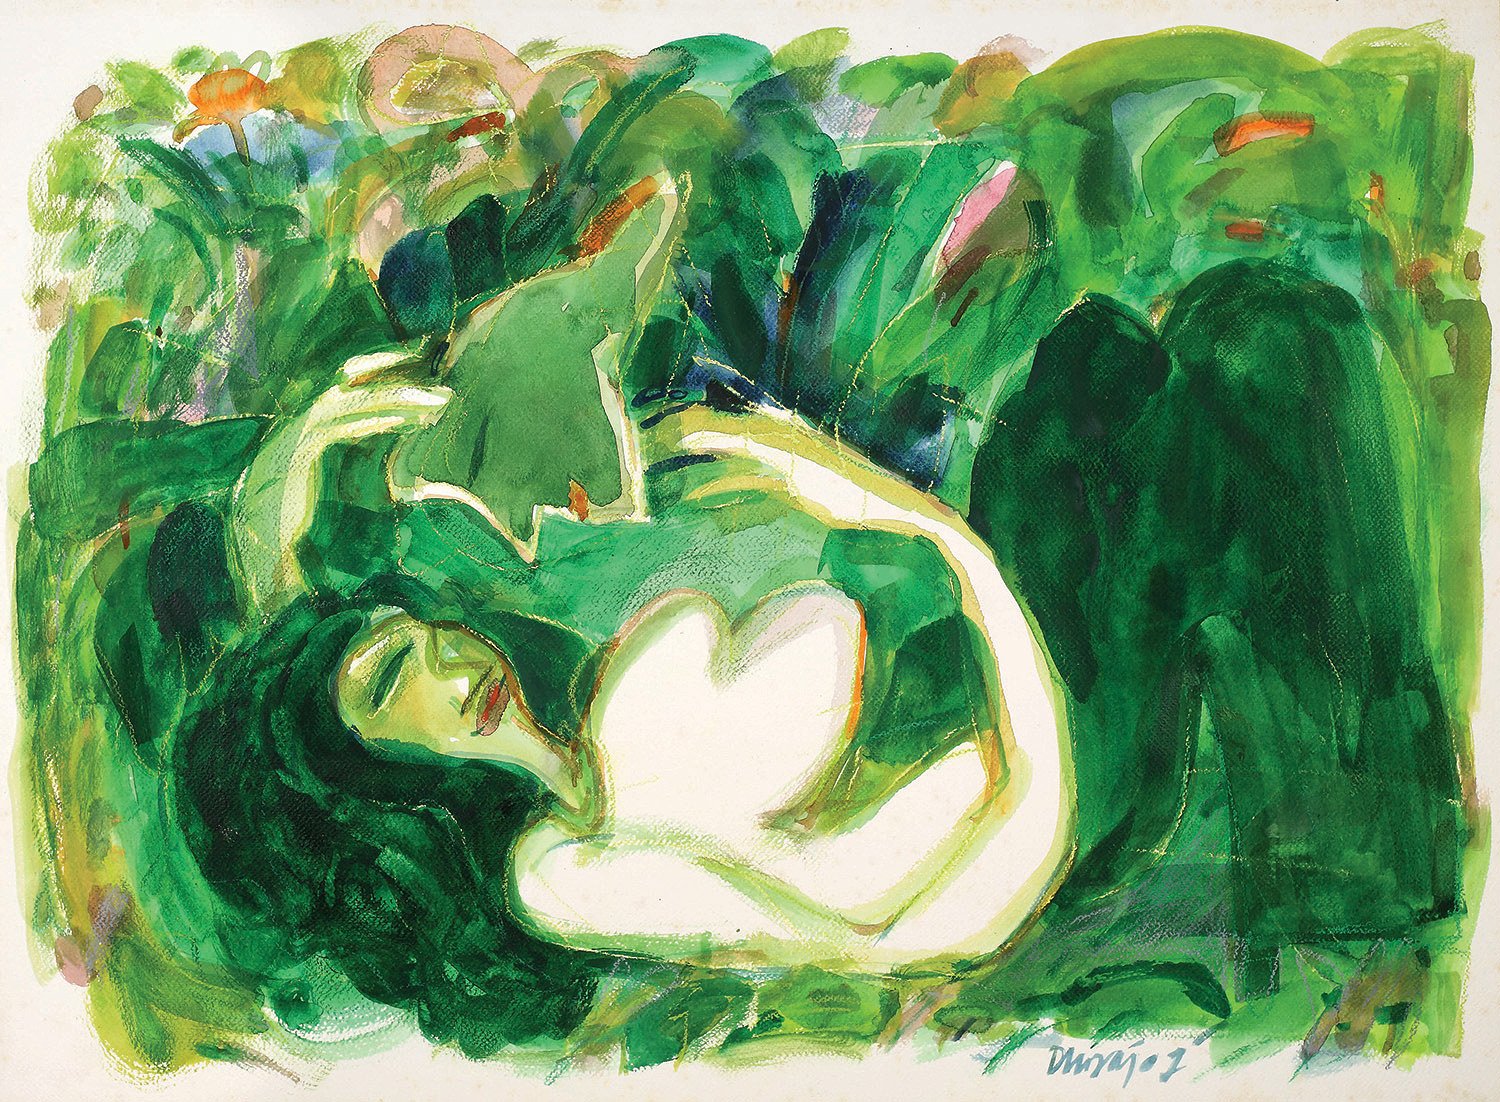 Lovers|Dhiraj Choudhury- Watercolor on Paper , 2007, 22 x 30 inches